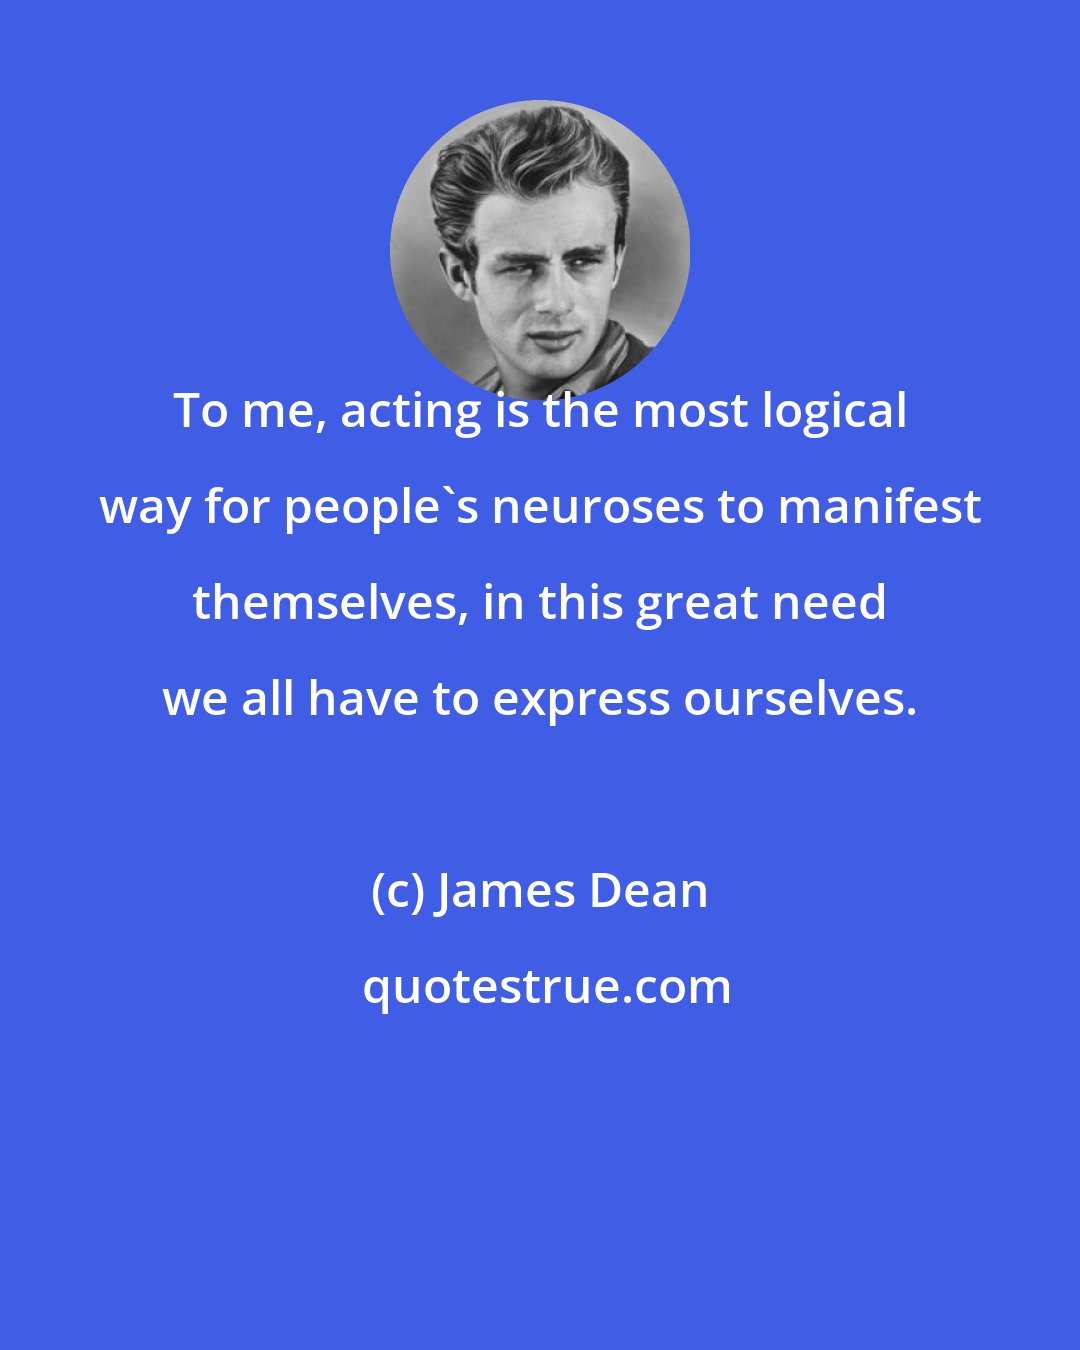 James Dean: To me, acting is the most logical way for people's neuroses to manifest themselves, in this great need we all have to express ourselves.